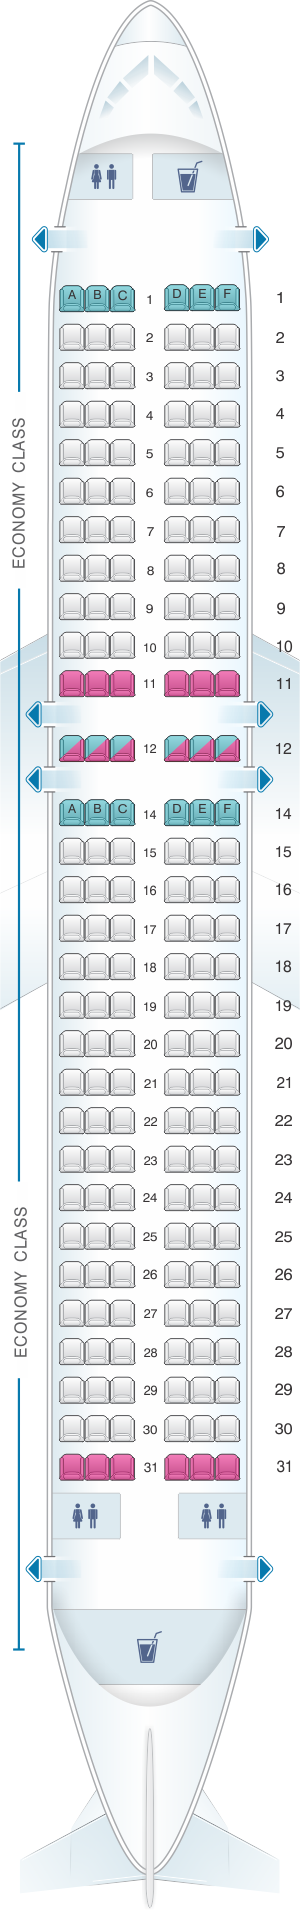 Seat Map Vueling Airbus A320 | SeatMaestro